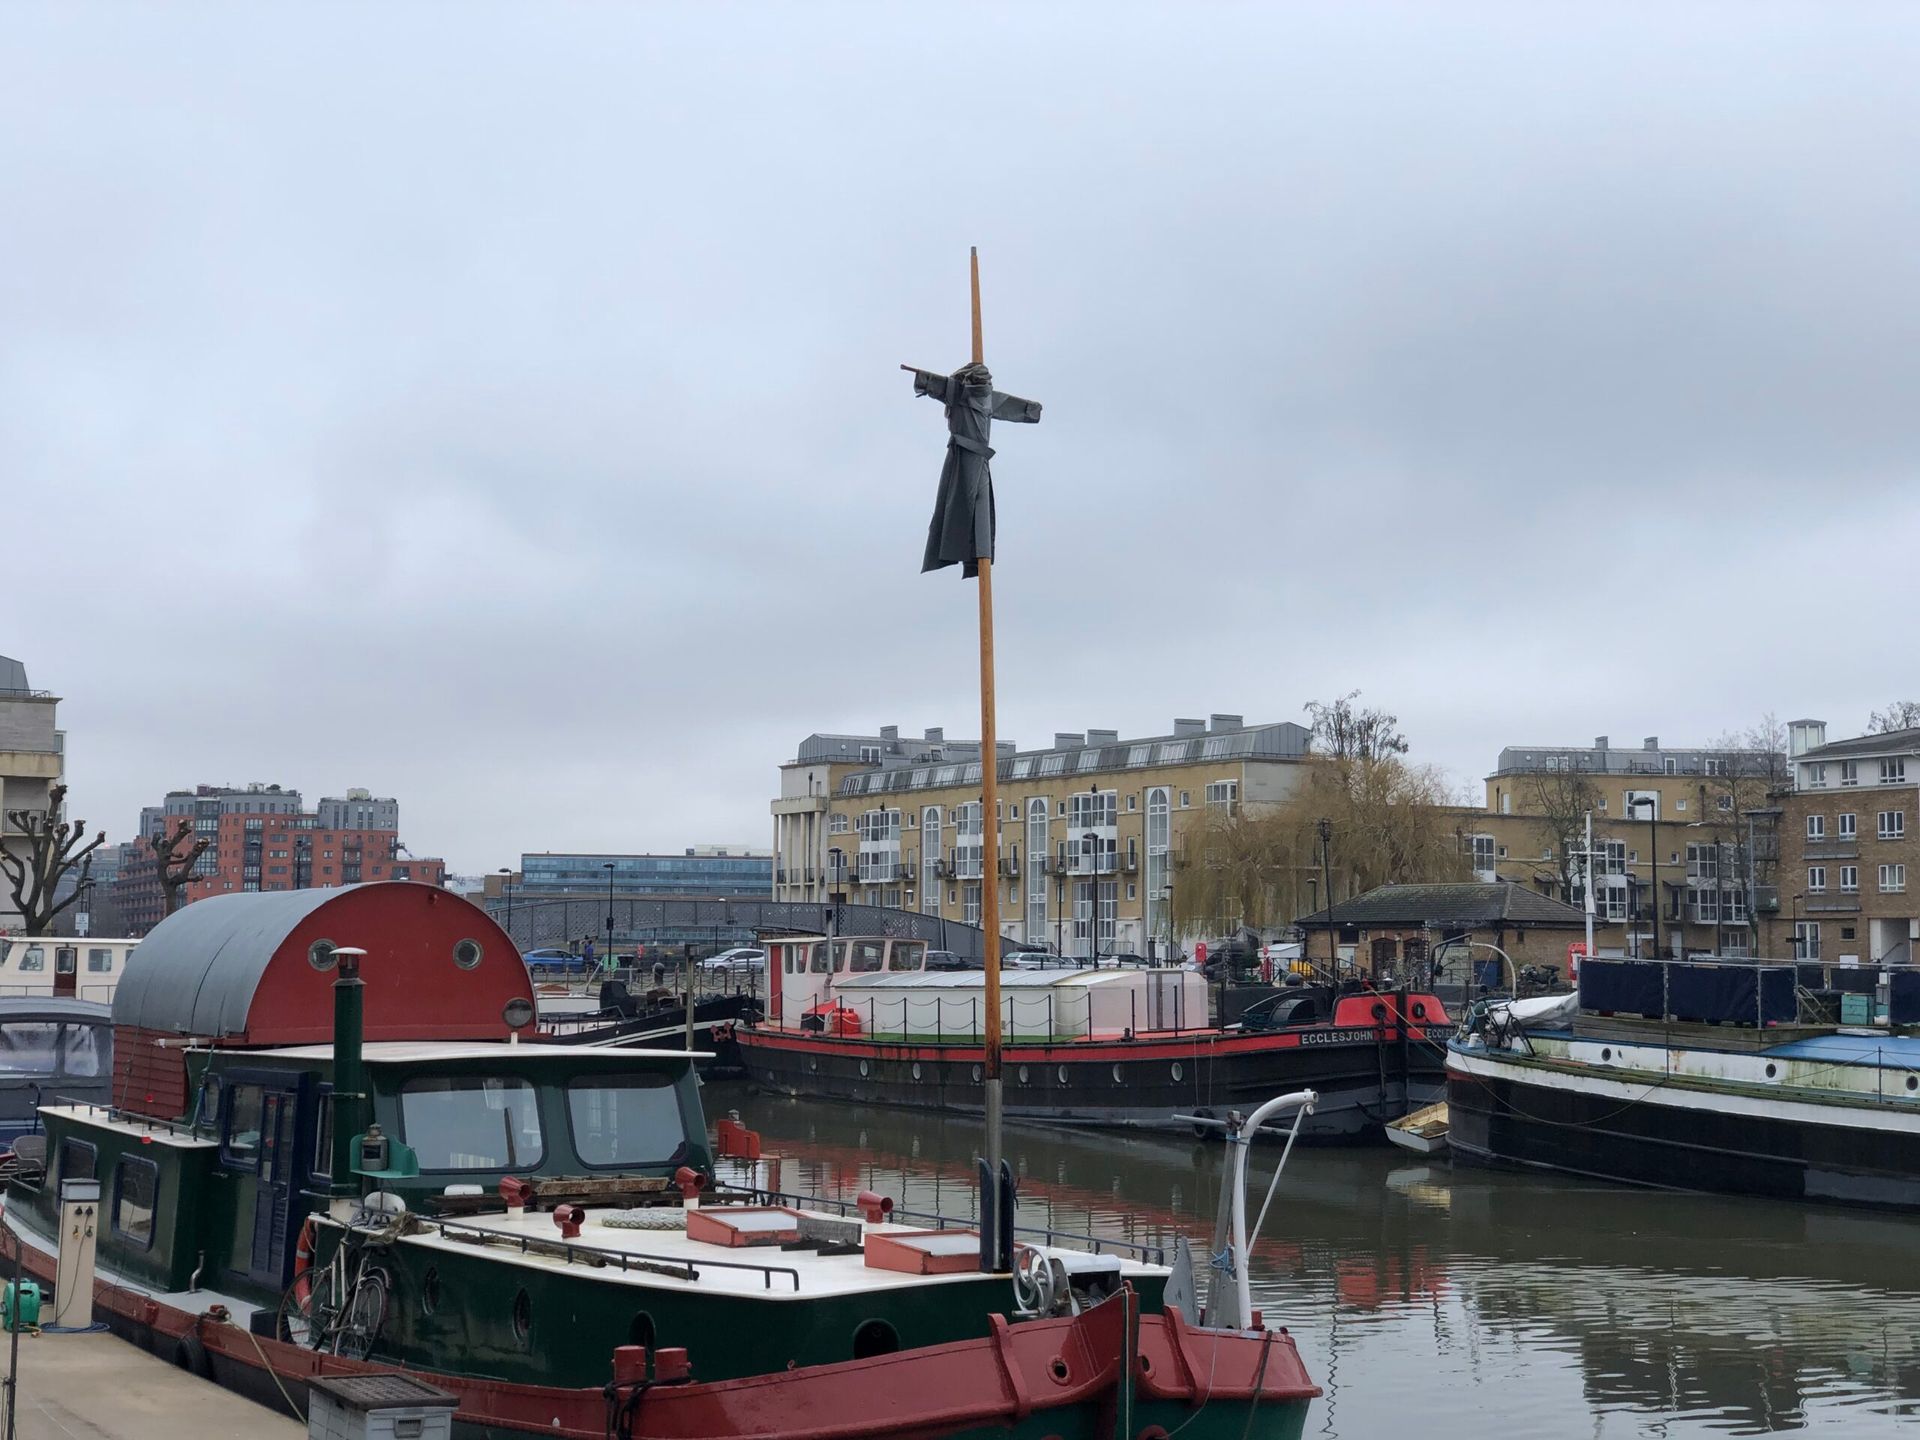 A scarecrow like figure hangs on a twenty foot high crusafix on the mast of an old green barge houseboat in a dock surrounded by other houseboats and modern blocks of flats.